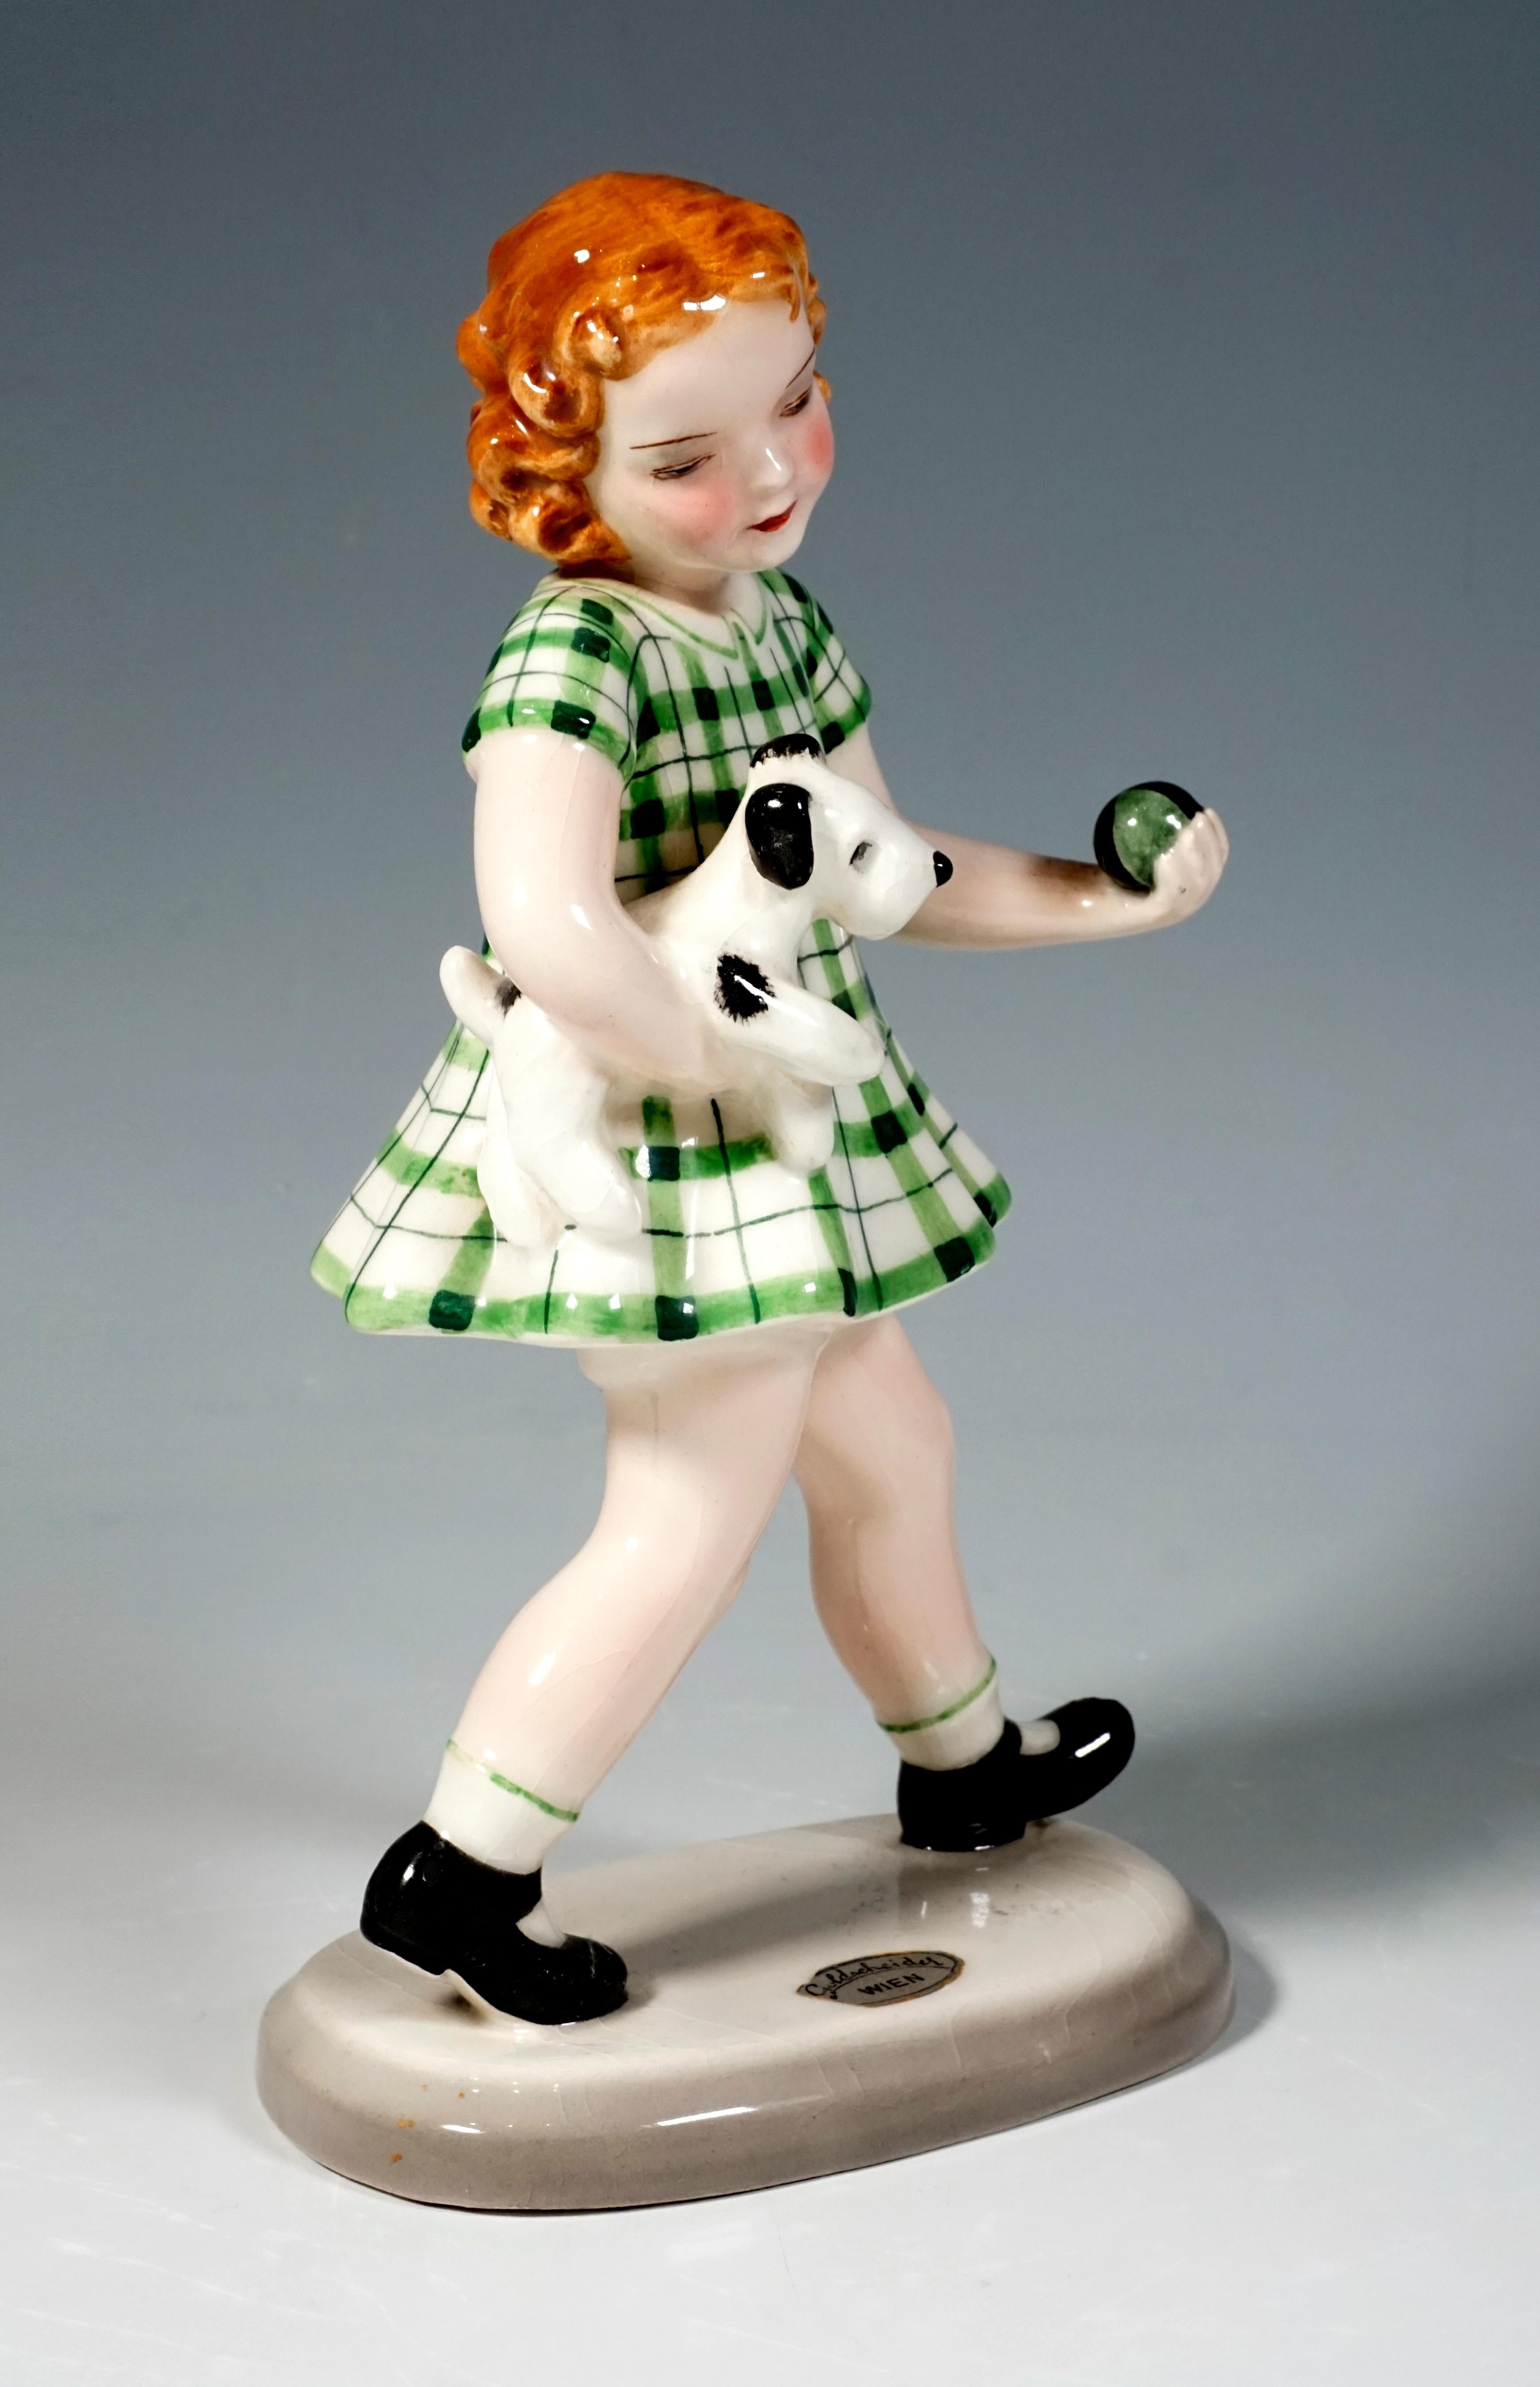 The striding red-haired girl in a green checkered dress carries a small dog under her right arm, in her left hand she holds a small green-black ball.
On a beige, oval base.

Designed by Adolf Prischl (1912 - 1970), Sculptor, numerous of his